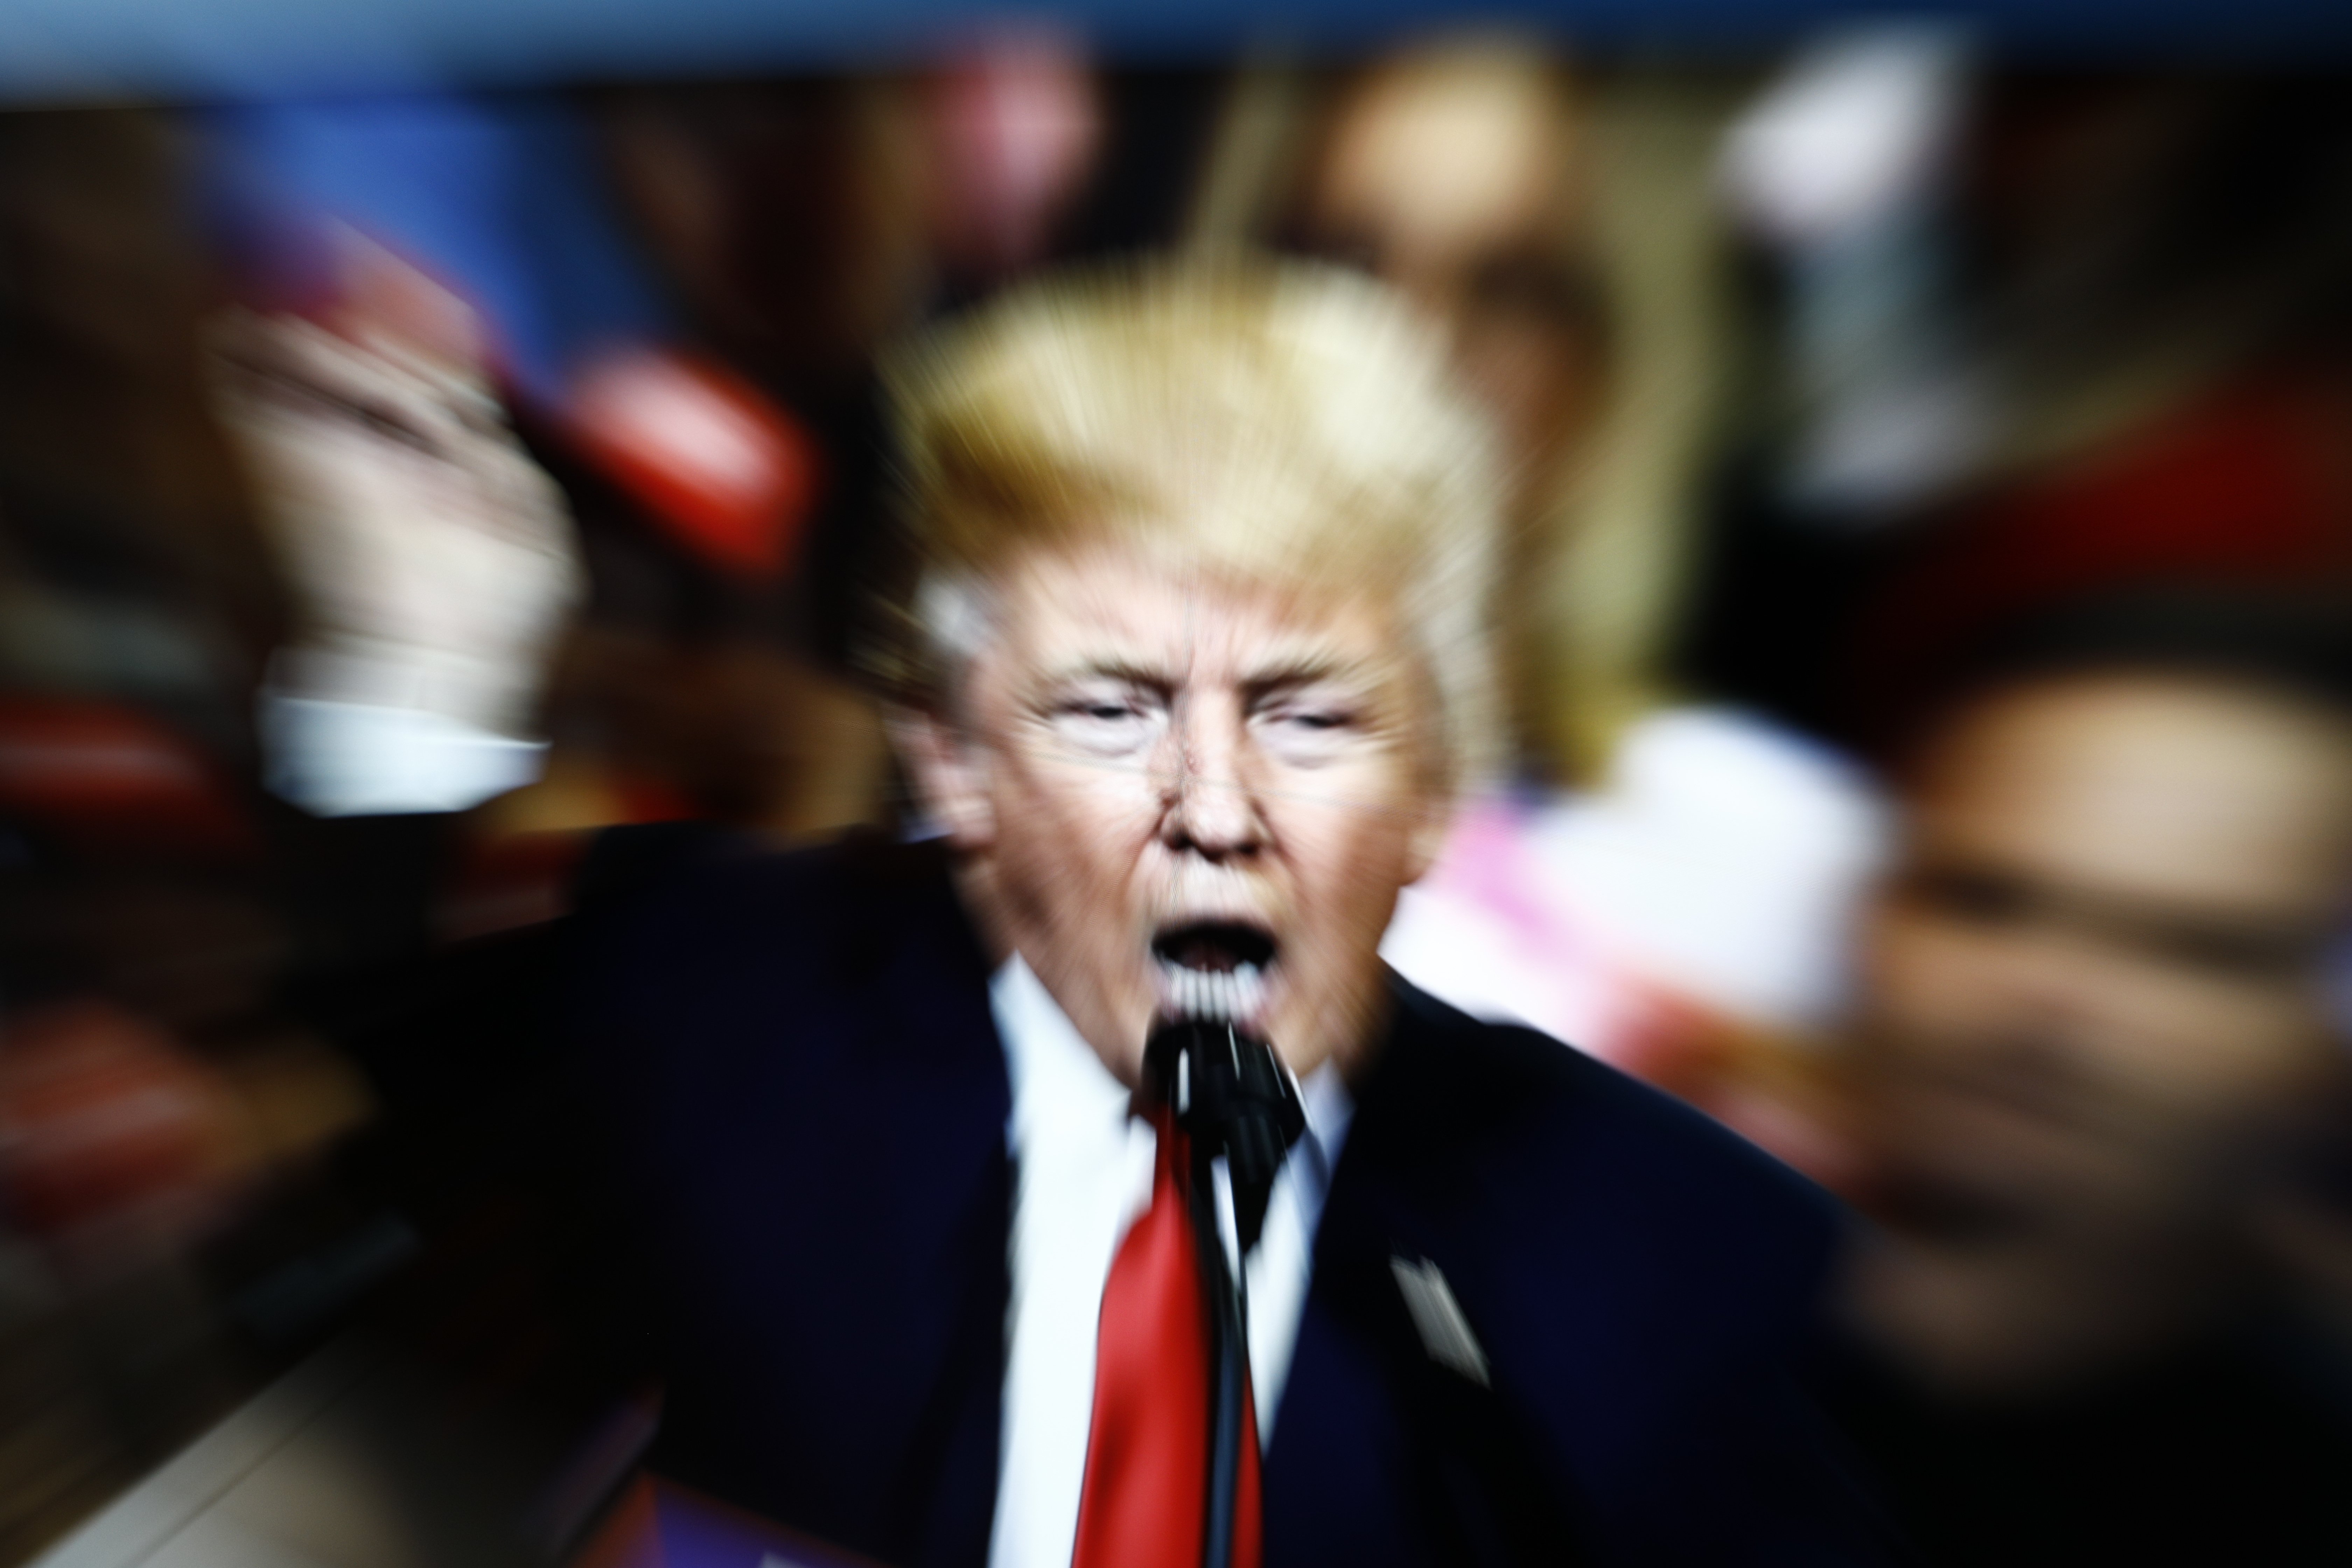 distorted photo of Donald Trump yelling